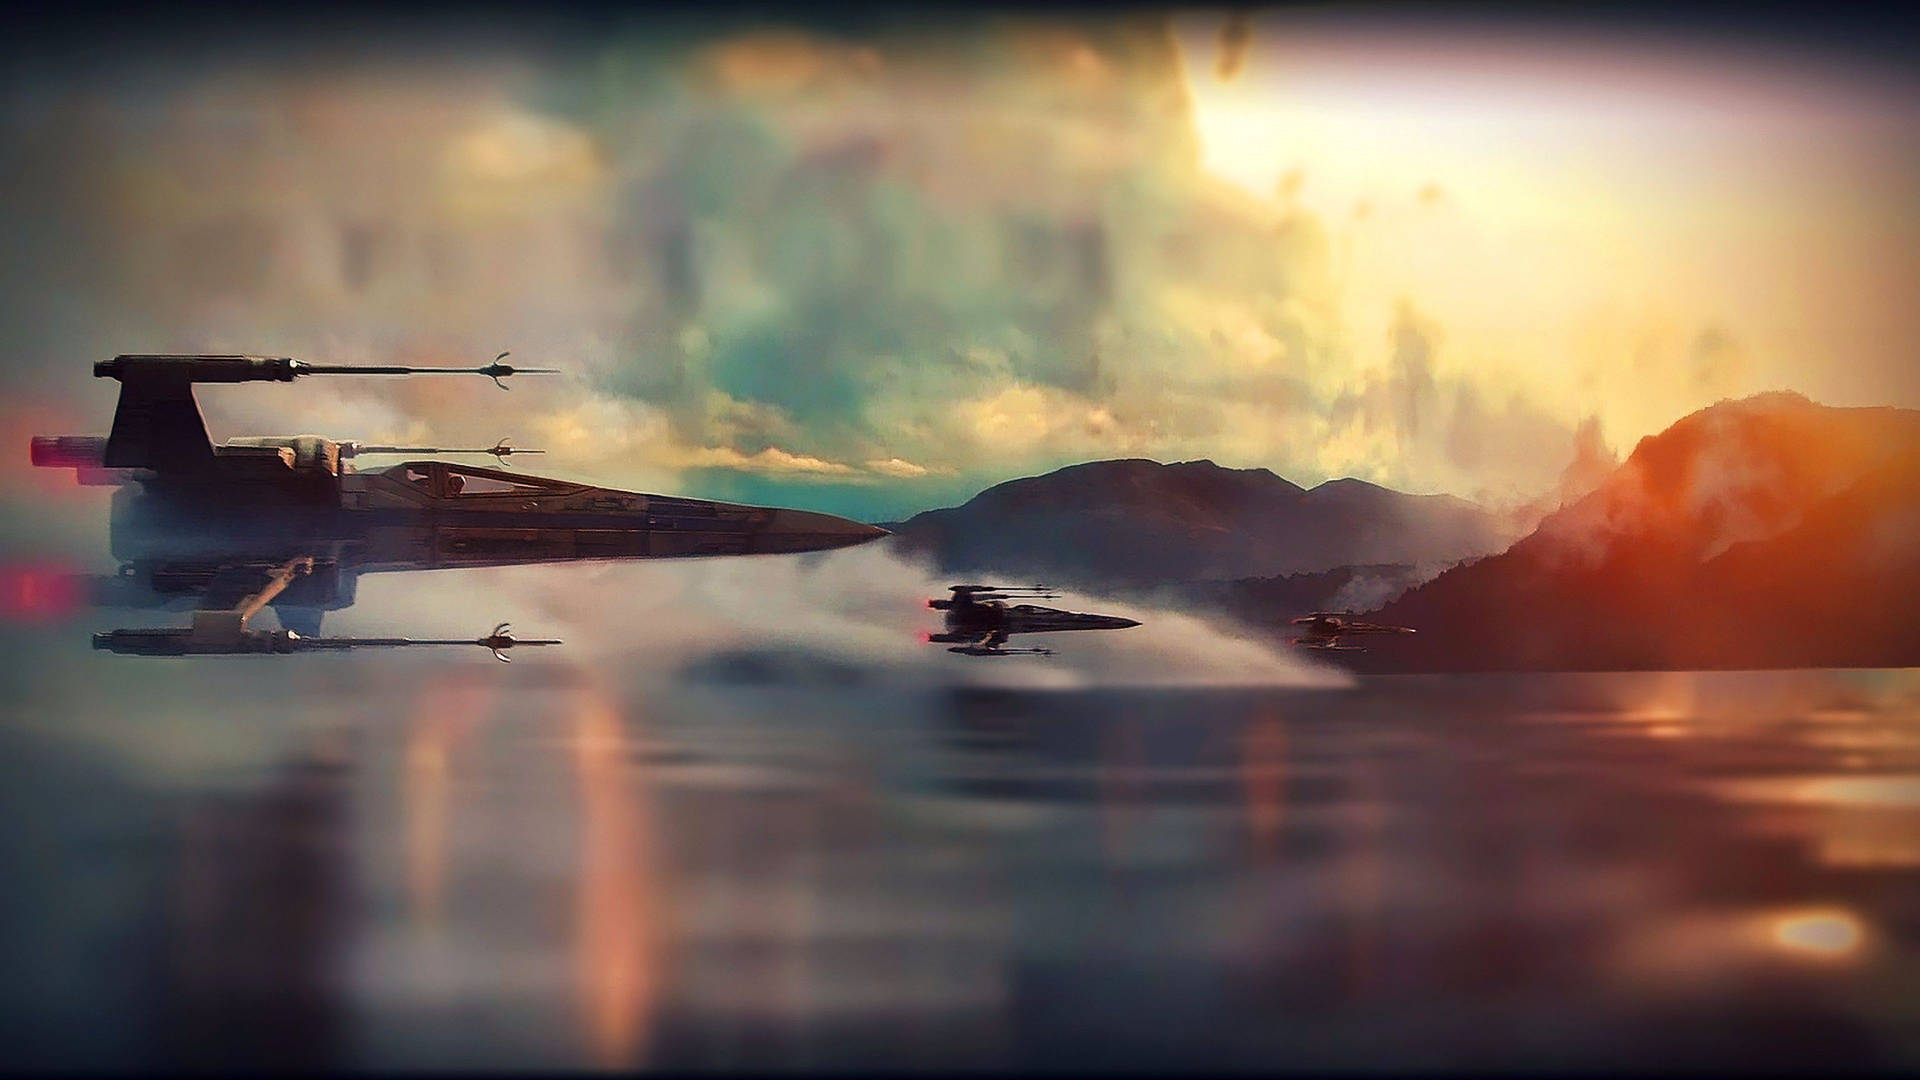 Discover the peaceful beauty of Star Wars Landscape Wallpaper